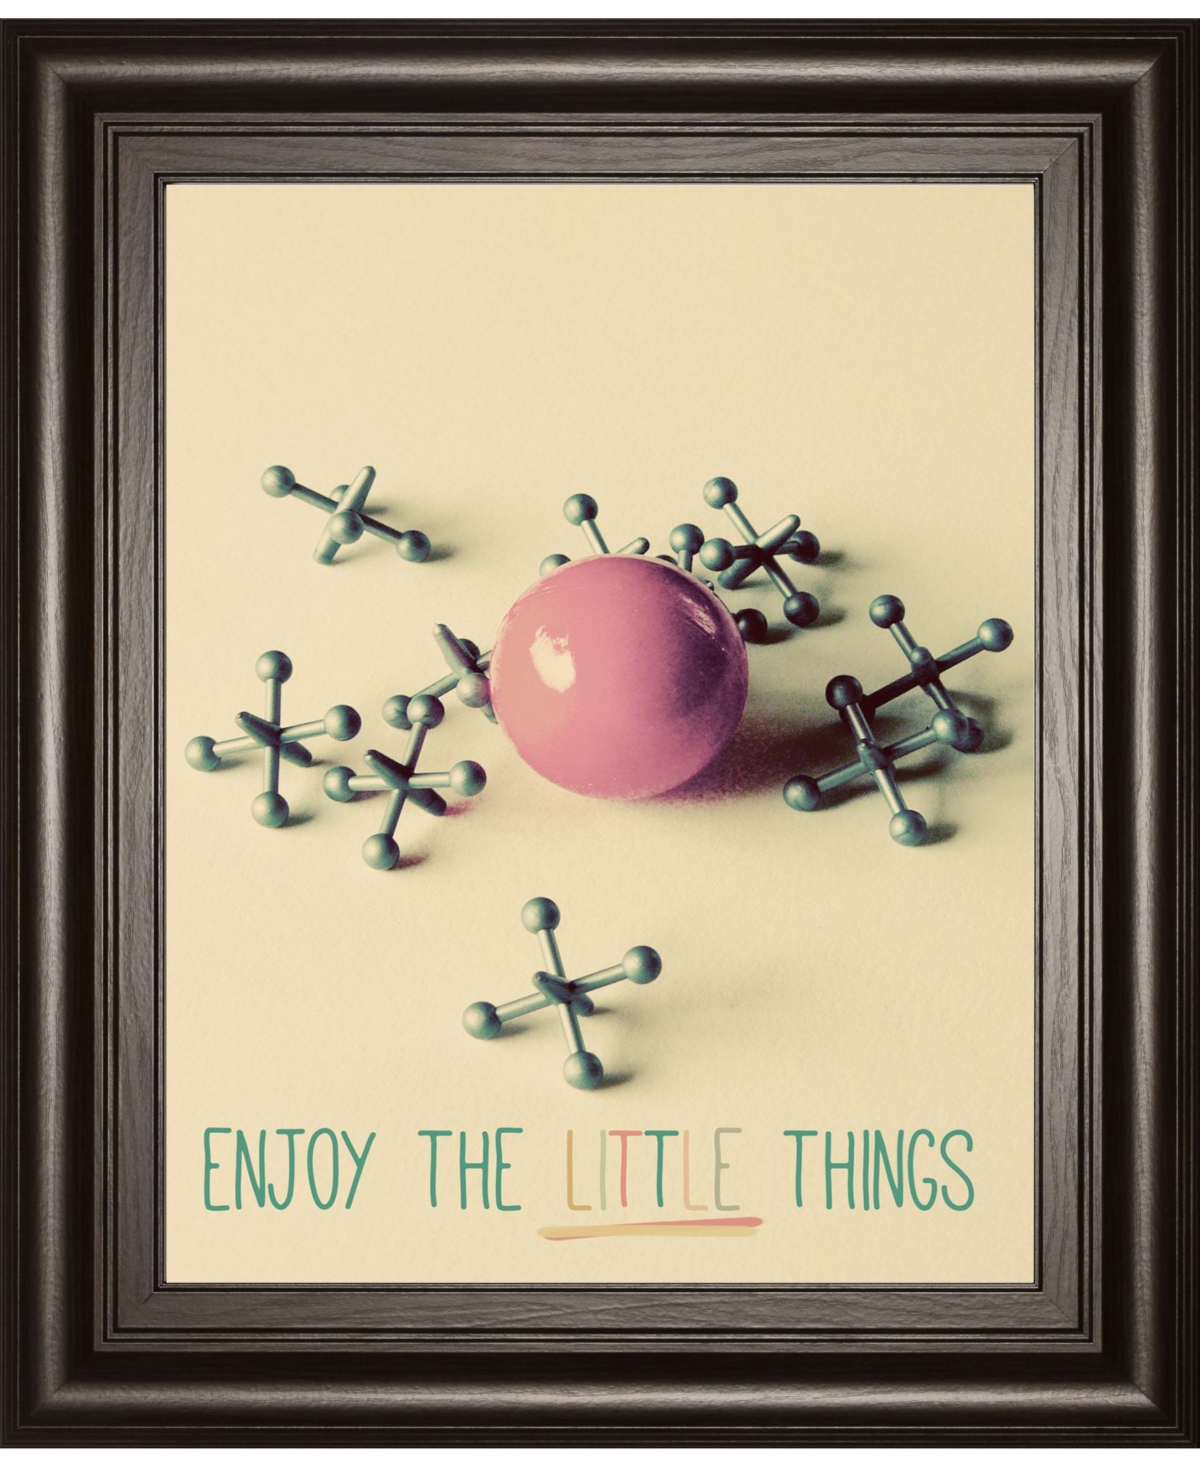 Enjoy The Little Things by Gail Peck Framed Print Wall Art, 22" x 26" - Pink